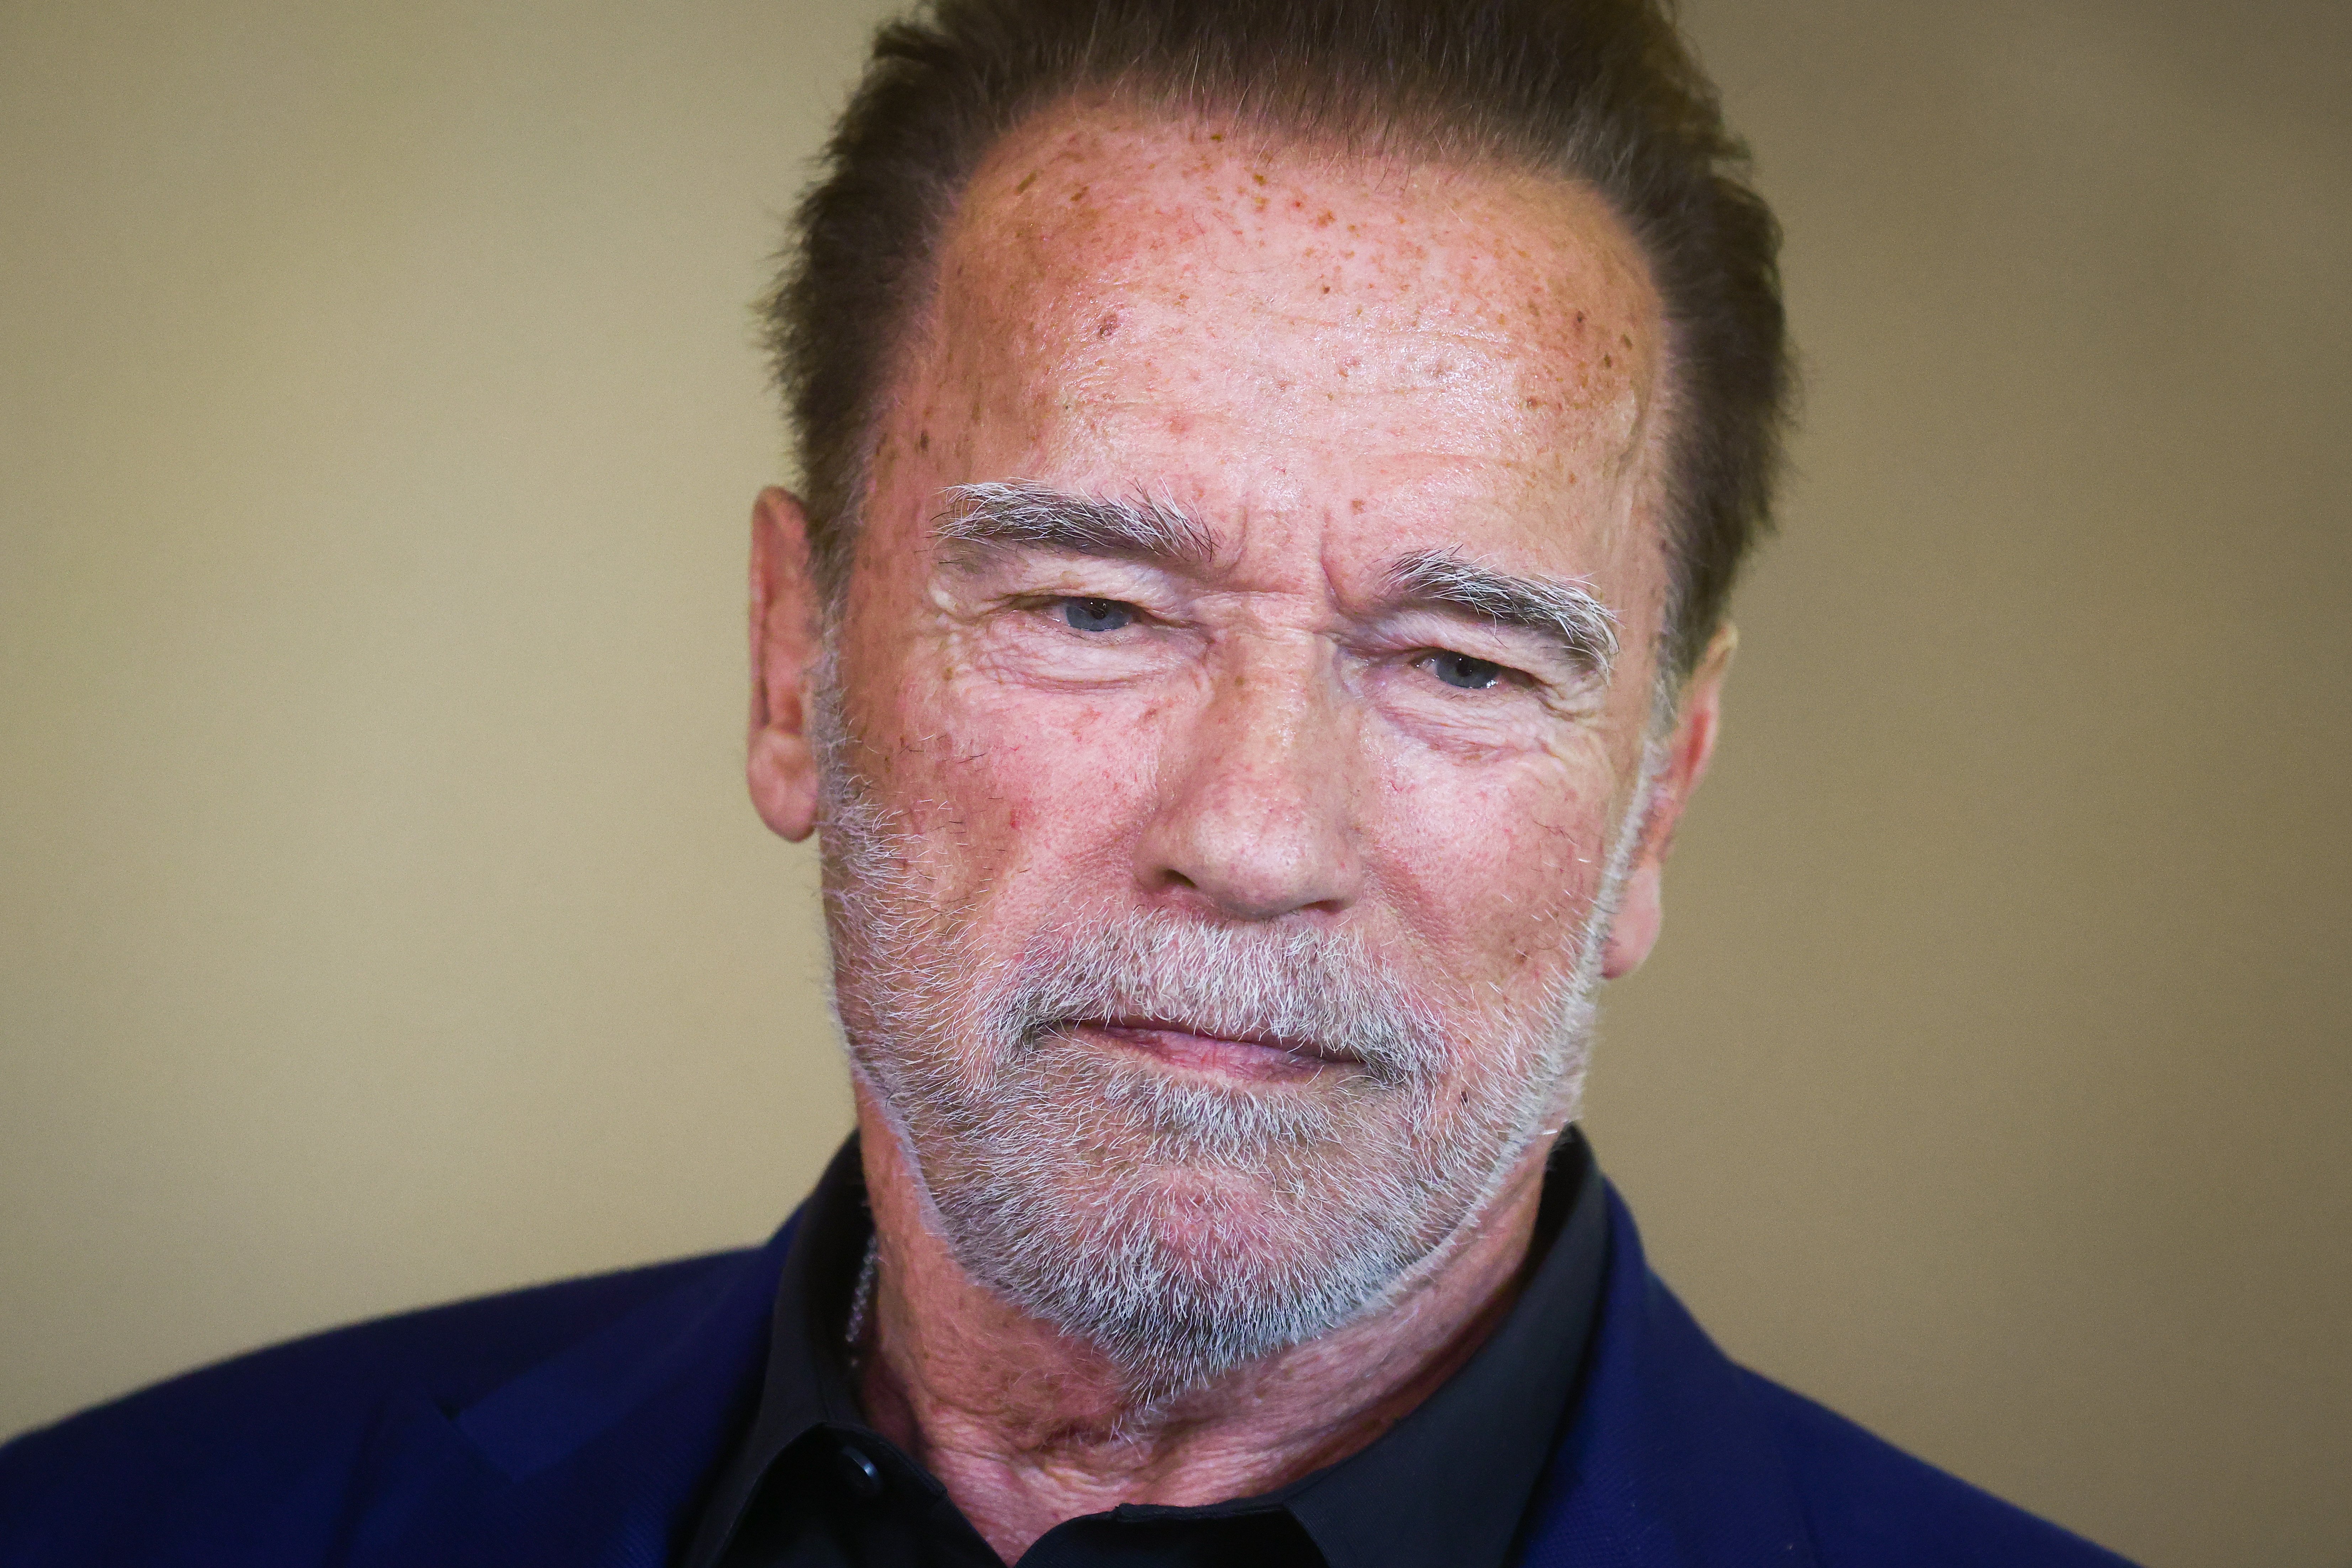 Arnold Schwarzenegger is pictured at the Auschwitz Jewish Center Foundation after visiting former Nazi German Auschwitz Birkenau concentration and extermination camp. | Source: Getty Images